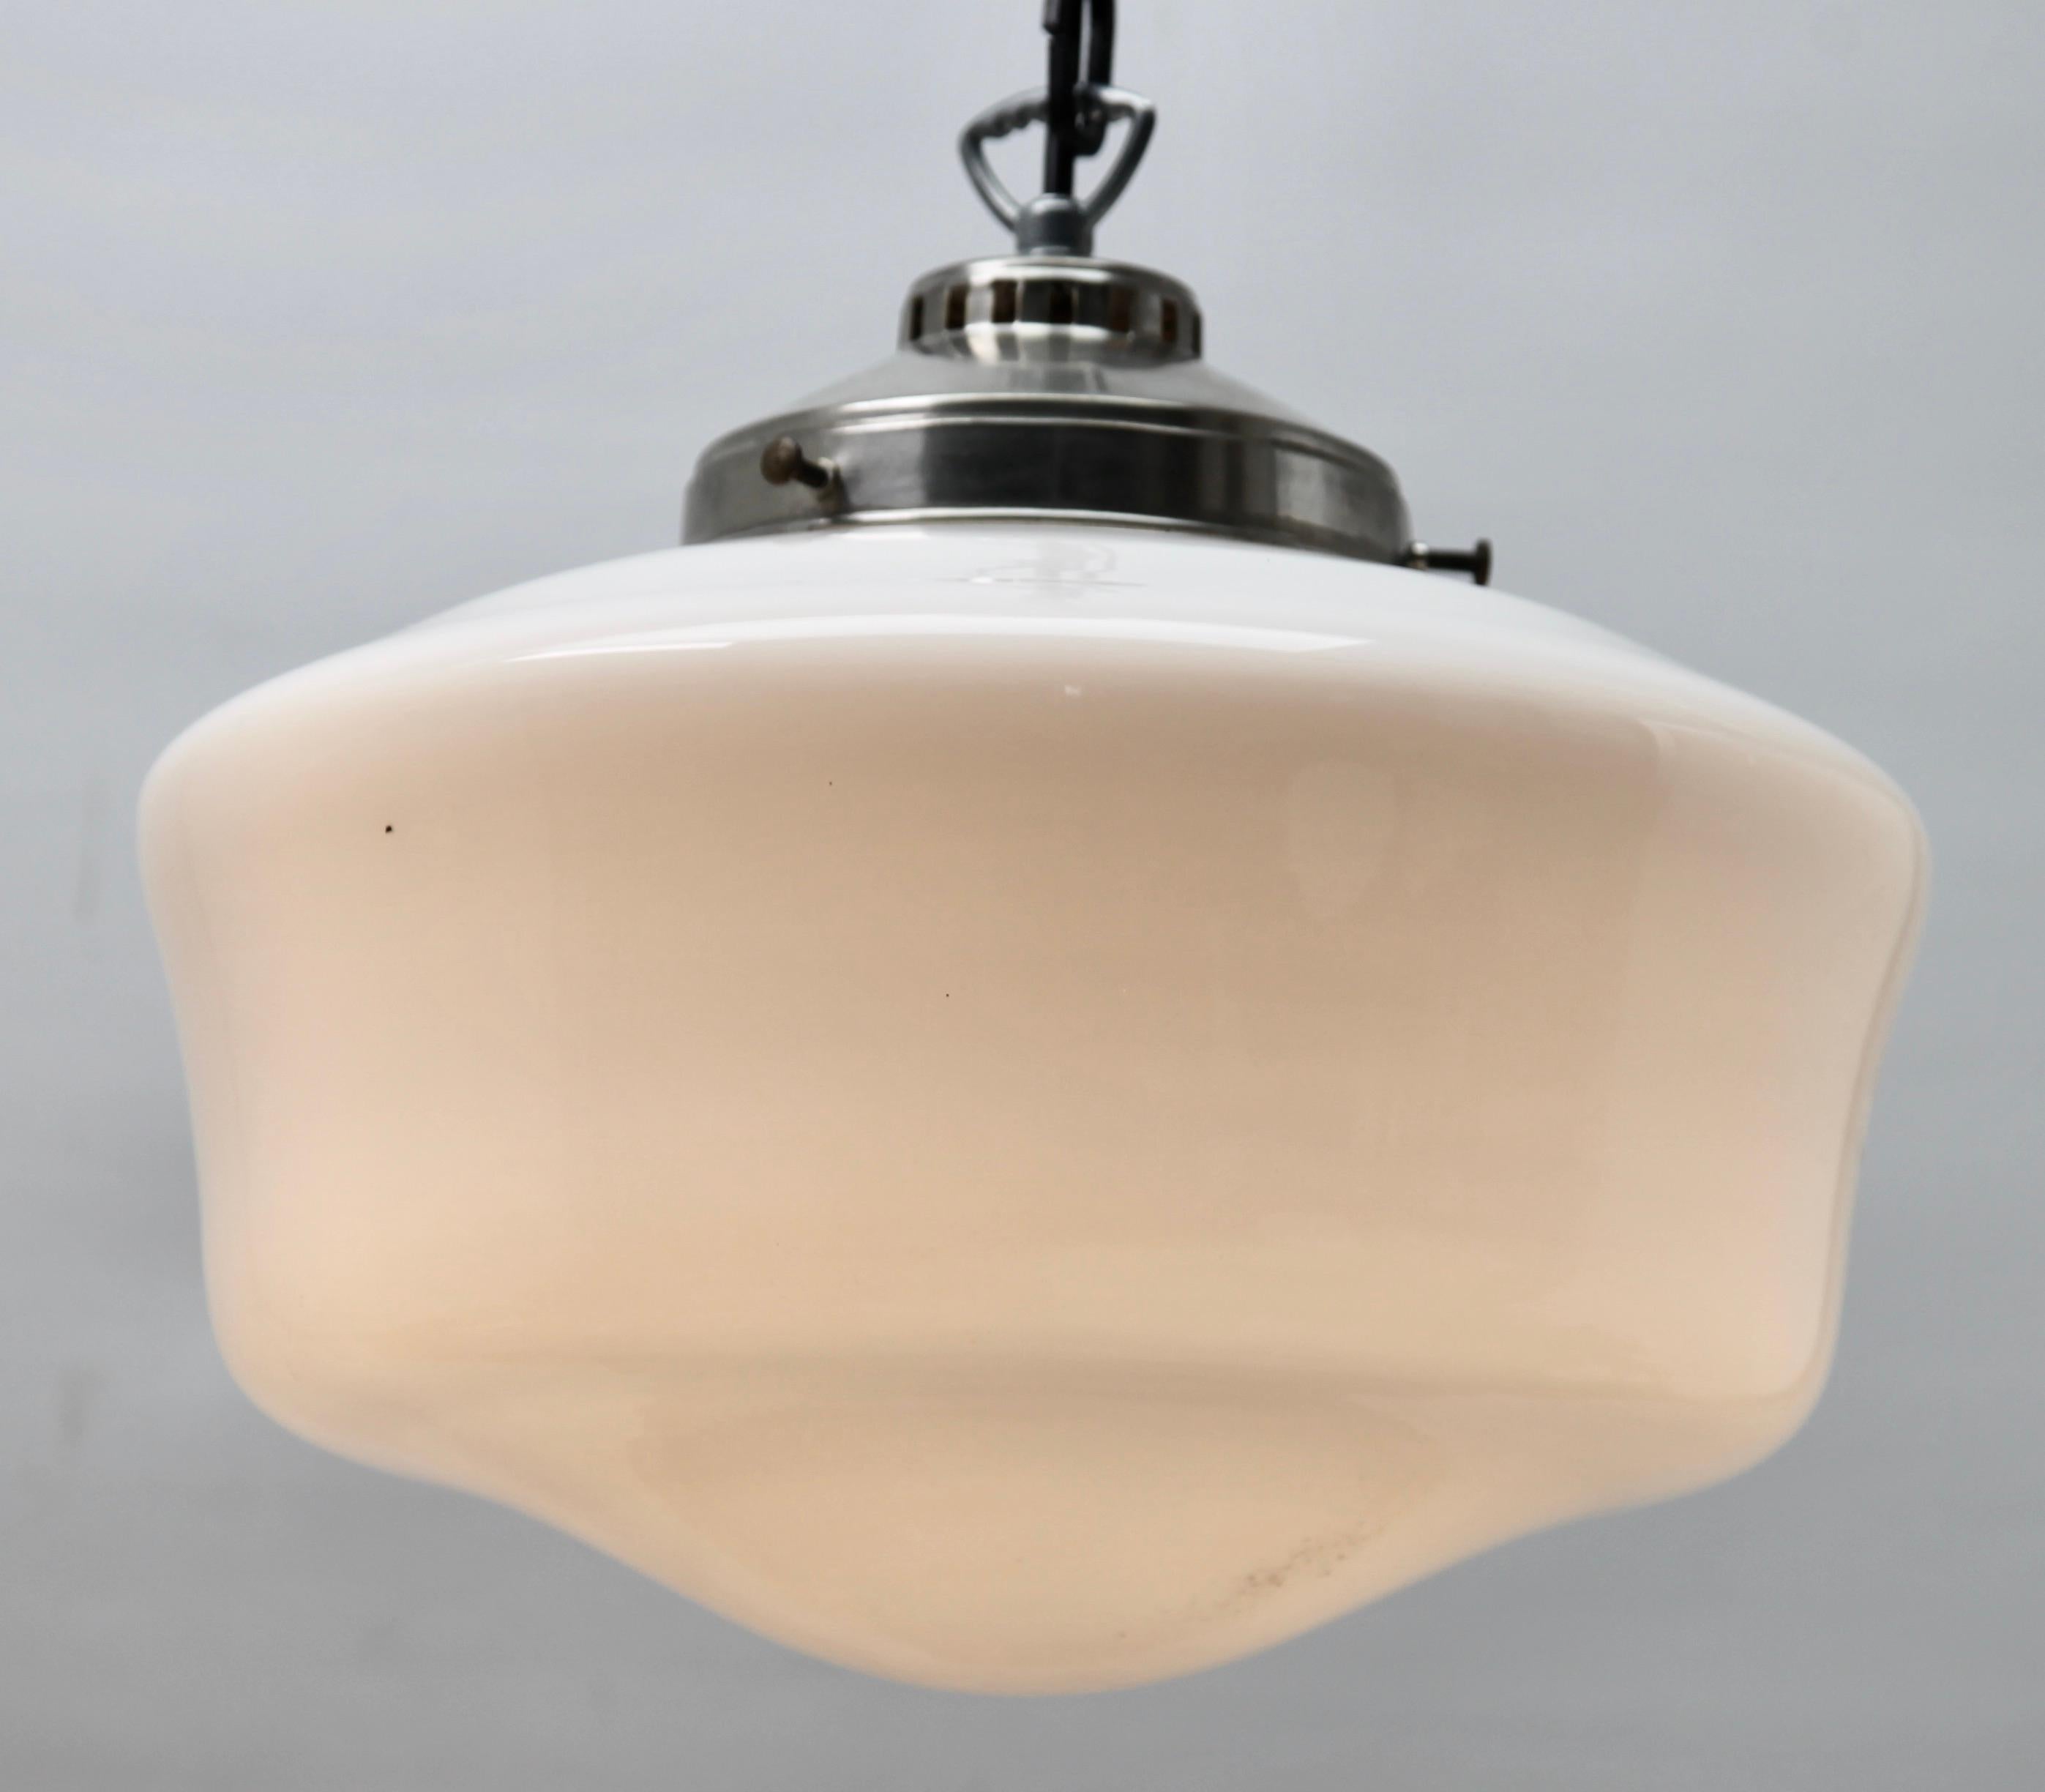 Hand-Crafted Pendant Lamp with a Opaline Shade, 1930s, Netherlands For Sale